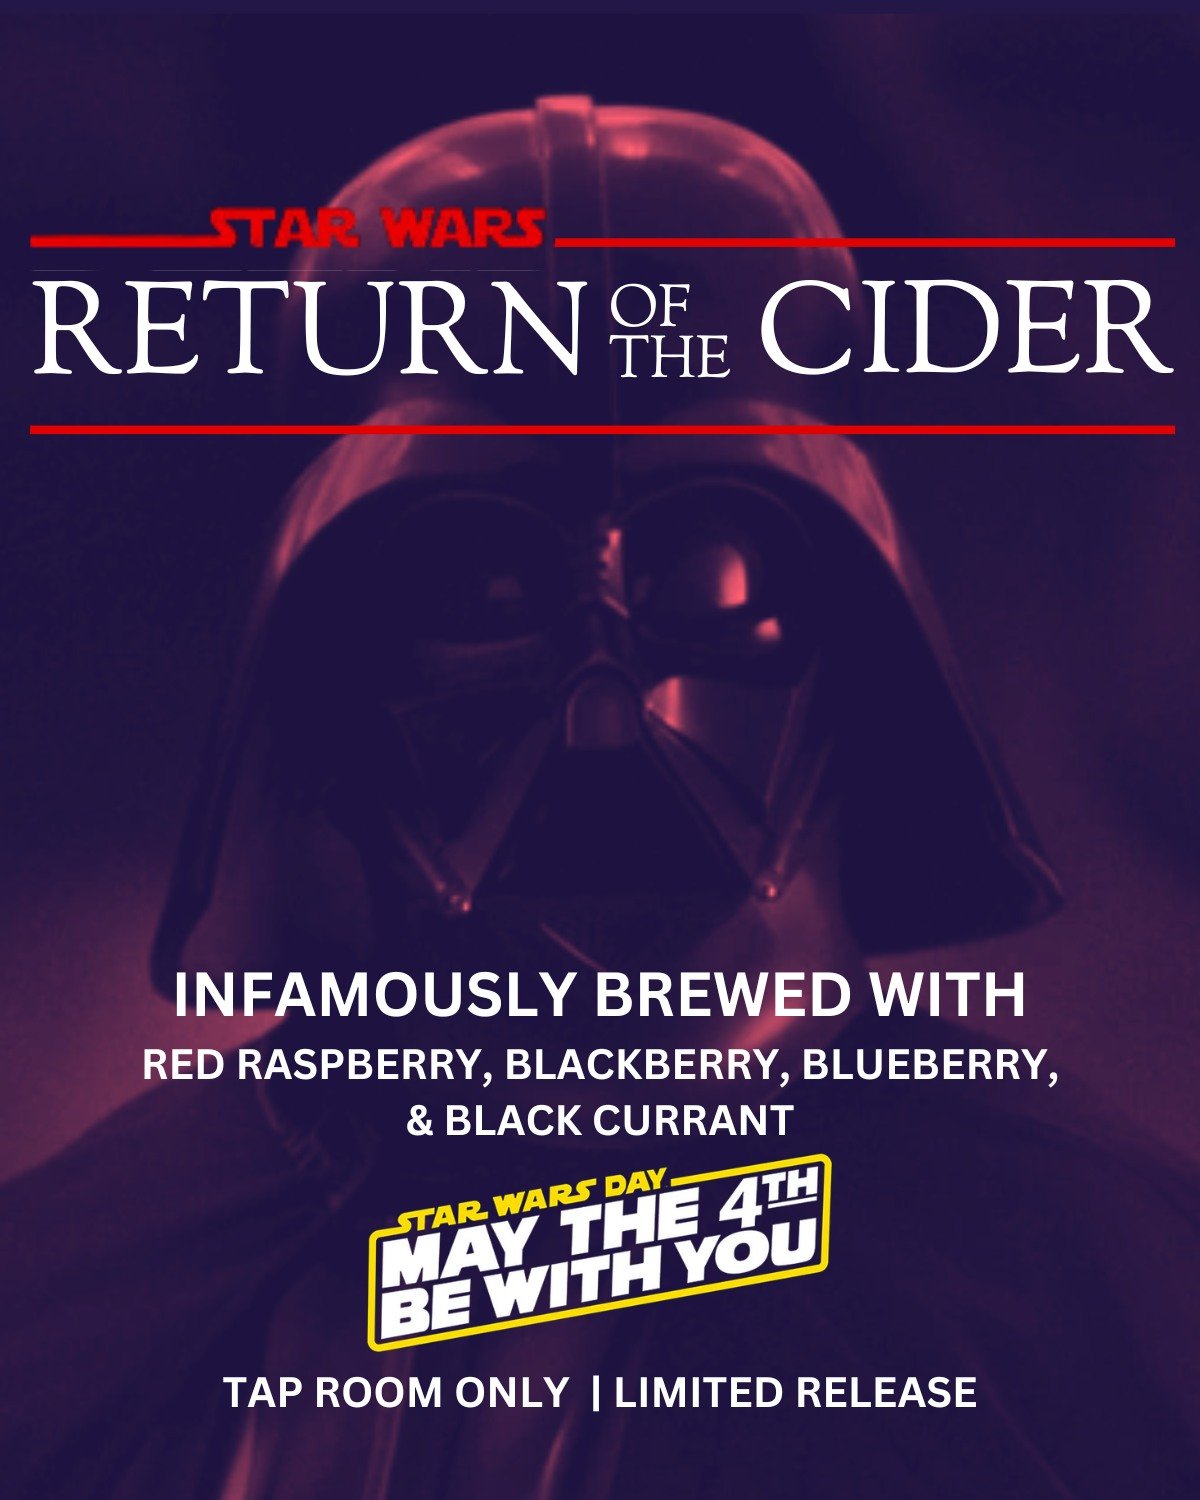 The Dark Cider is back on tap this weekend to celebrate Star Wars Day, May Fourth!
Brewed with all the darkest berries, Dark Cider is deep, rich, and seductive. With red raspberries, blackberries, blueberries, and black currants, Dark Cider is a forc